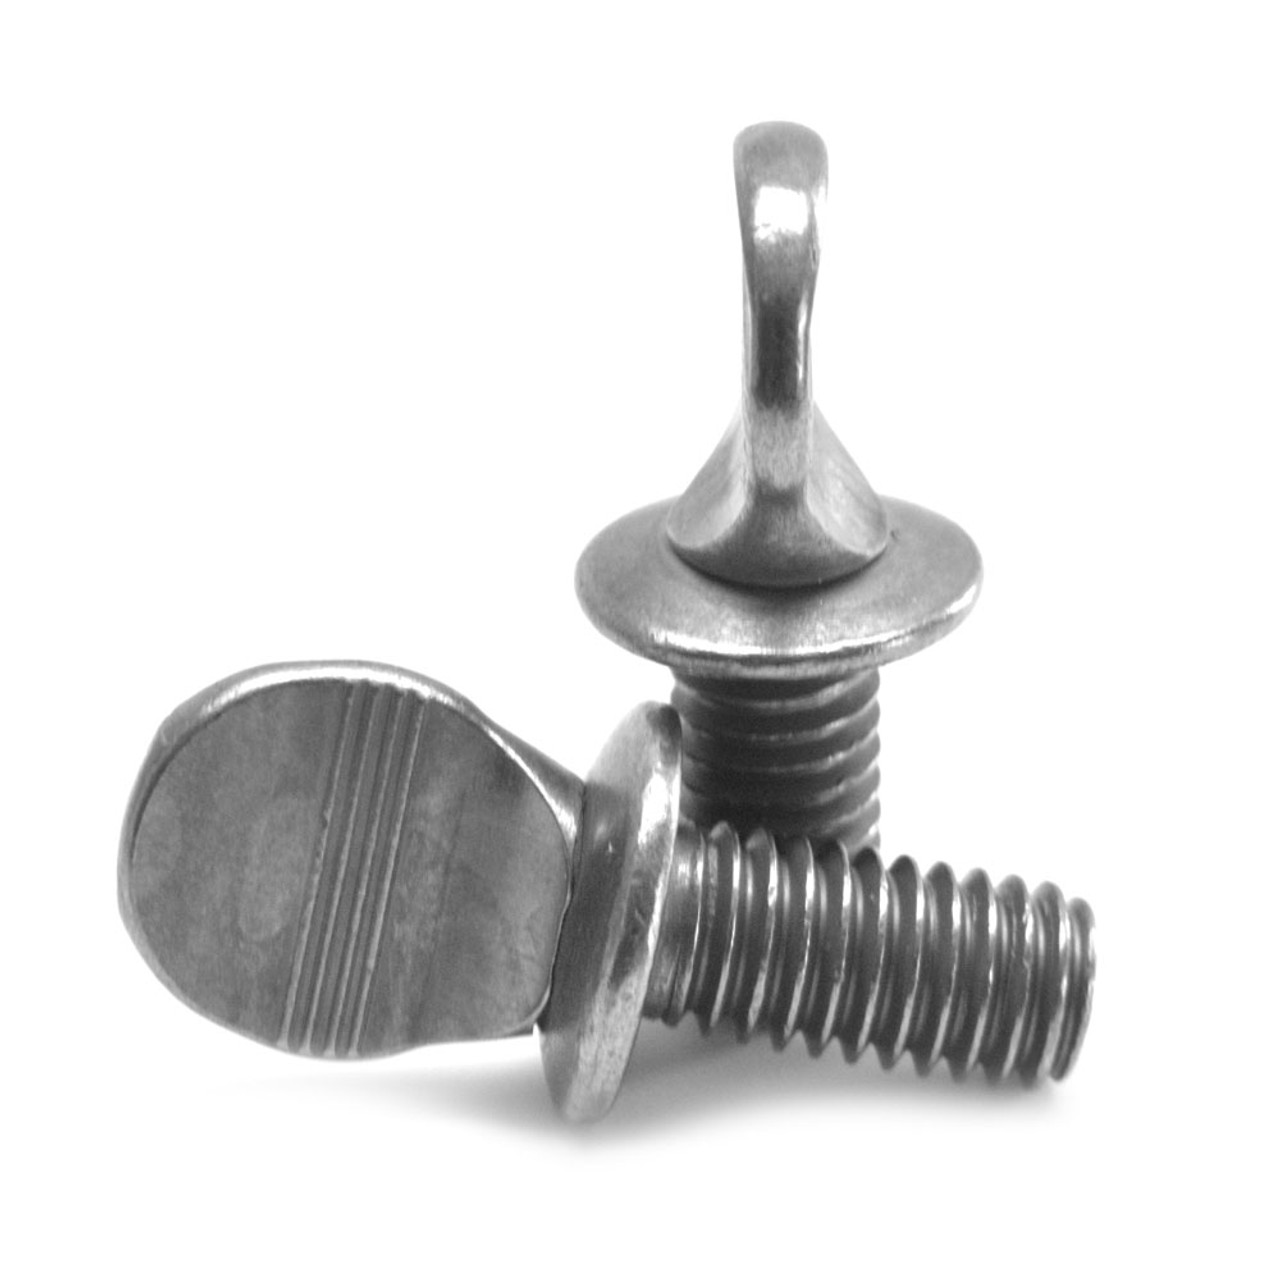 #10-32 x 3/4" Fine Thread Thumb Screw Type A with Shoulder Zinc Plated